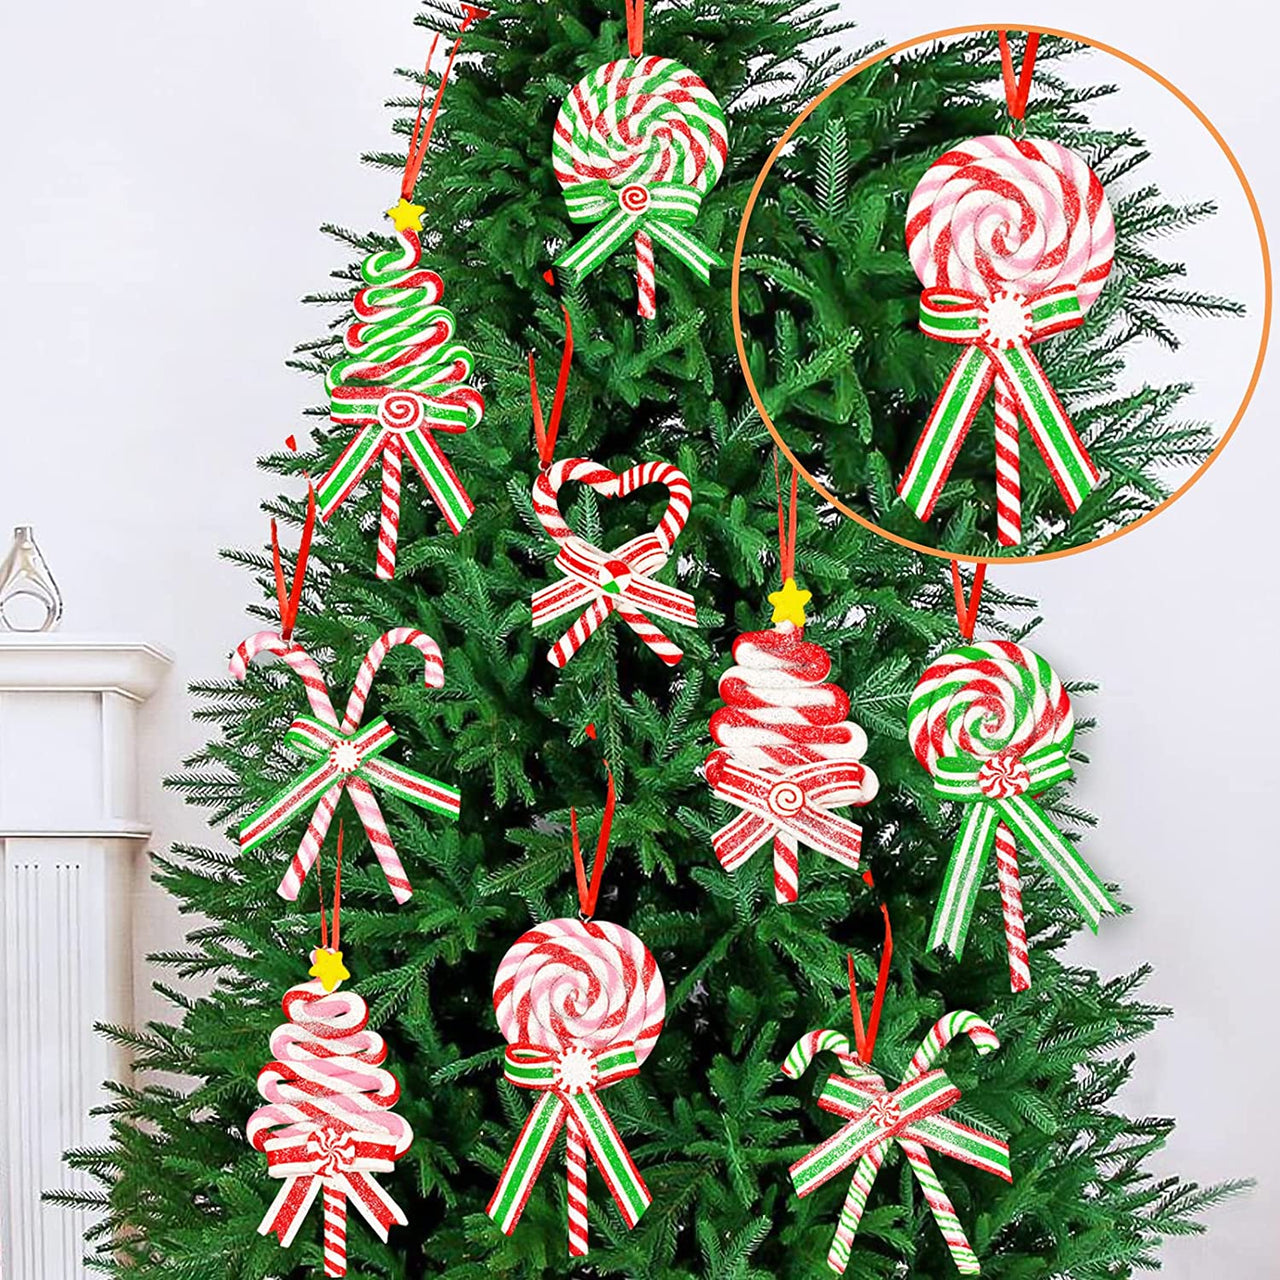 10Pcs Christmas Candy Lollipop Ornaments for Christmas Tree Decorations- Glitter Hanging Candy Cane Ornaments Polymer Clay Christmas Peppermint Decor with Ribbon for Xmas Tree Holiday Party Home Decor